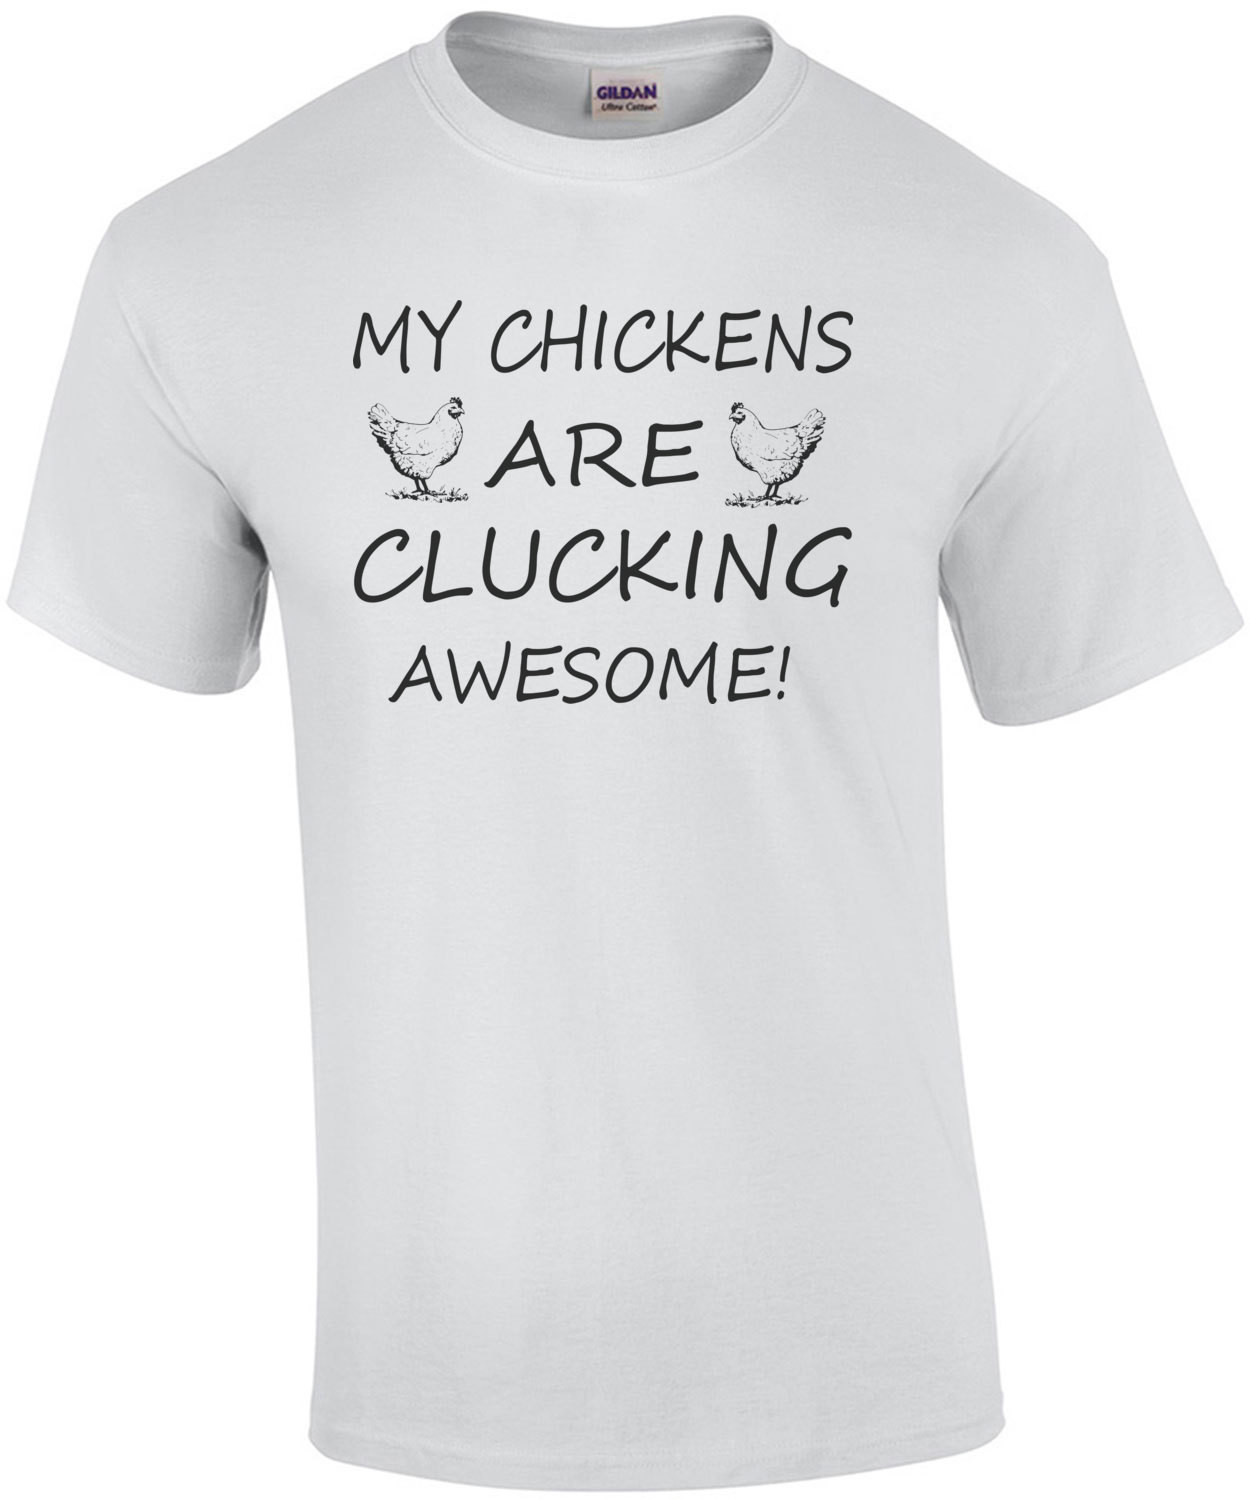 My Chickens Are Clucking Awesome T-Shirt